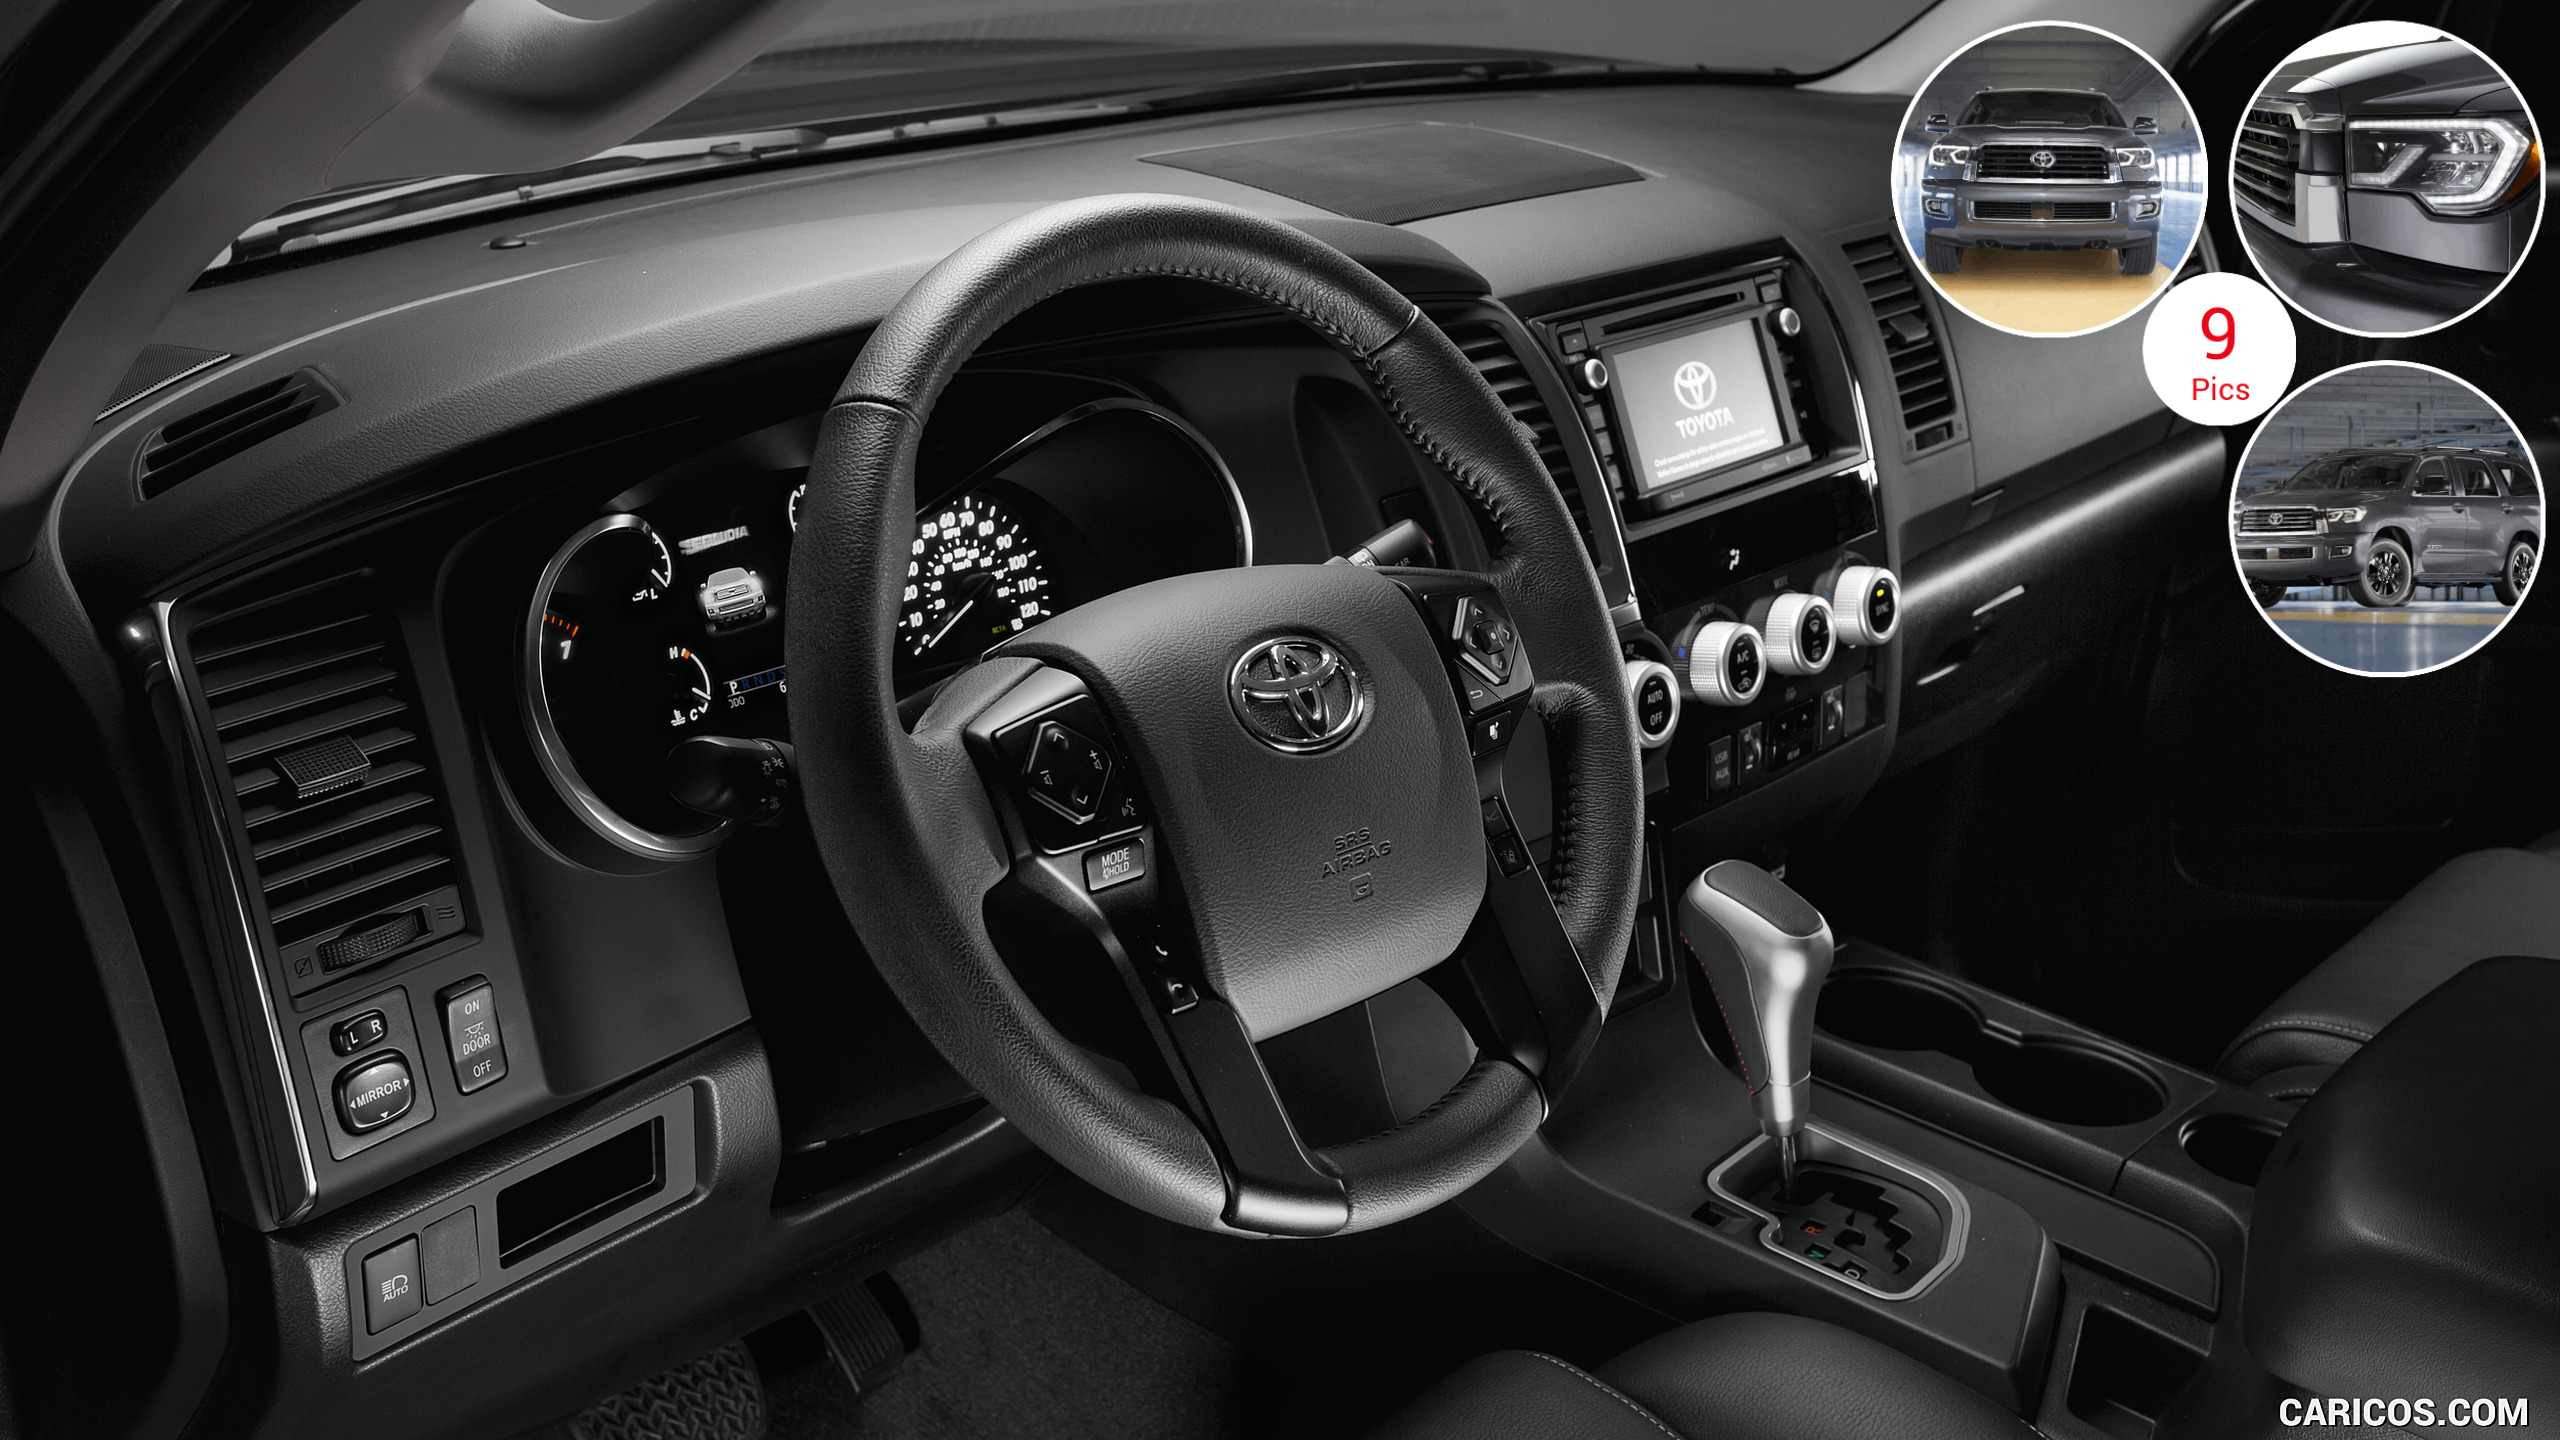 Download Image - Toyota Sequoia 2019 Inside , HD Wallpaper & Backgrounds